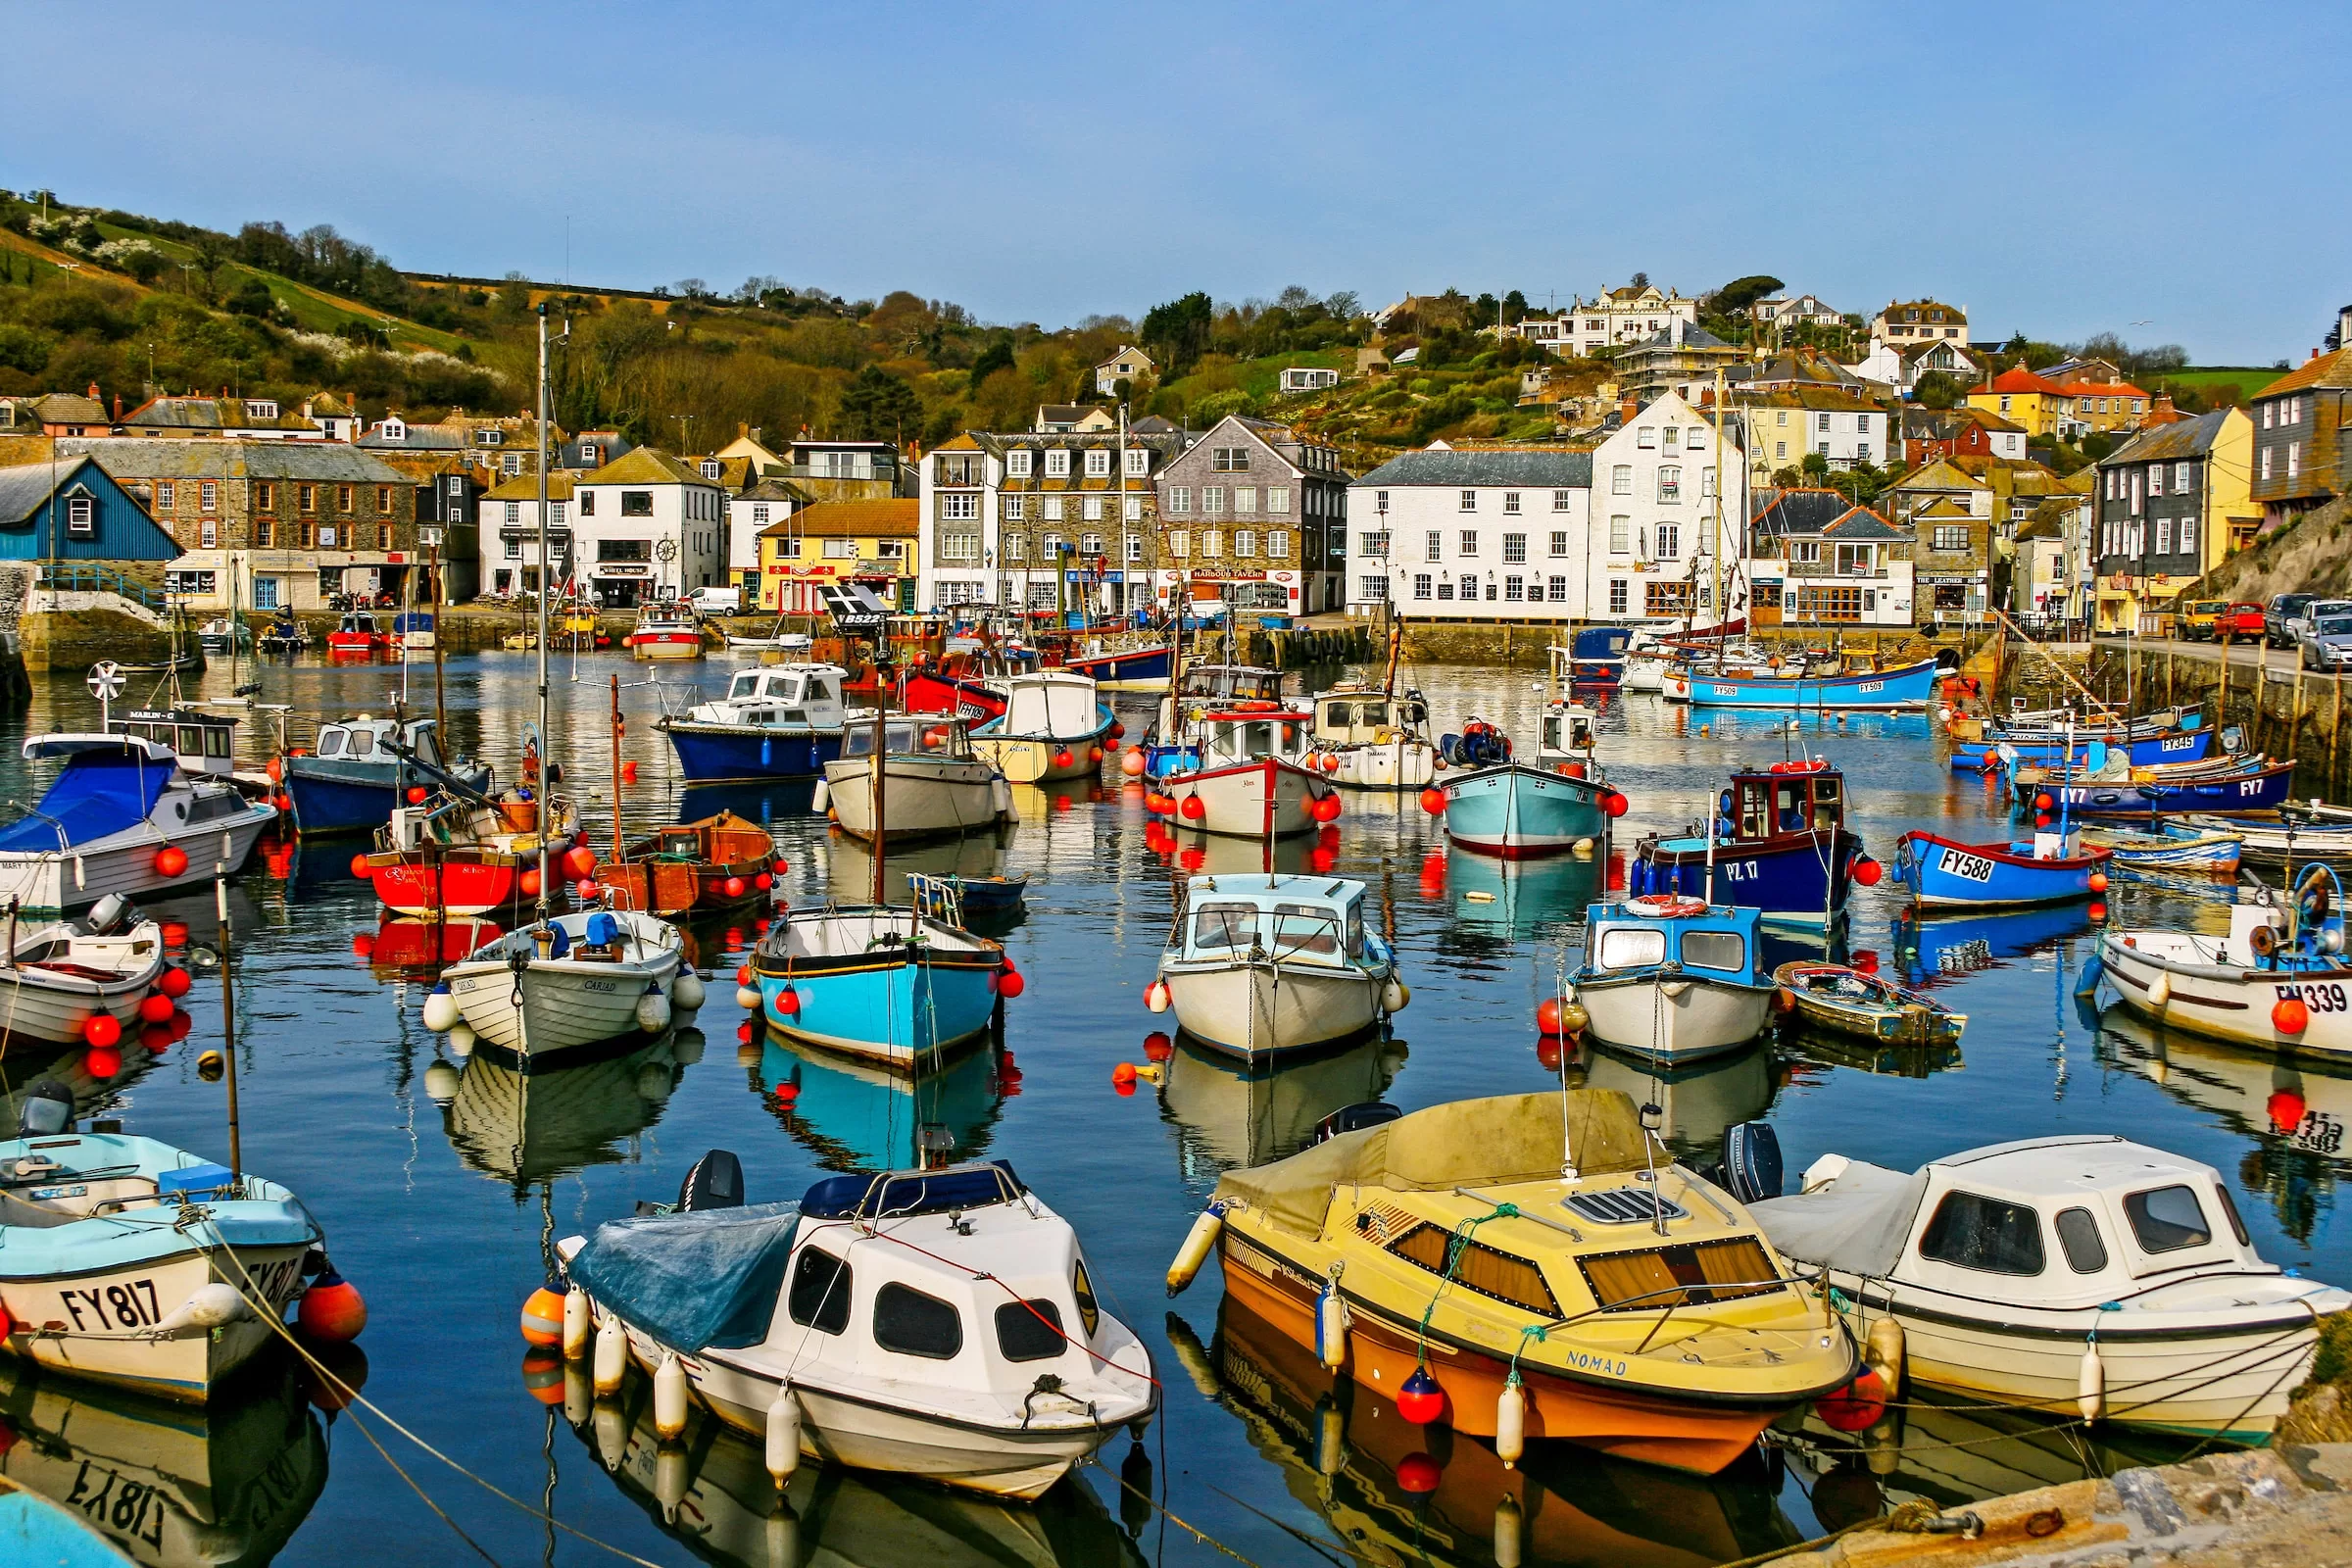 A cornish town, with boats